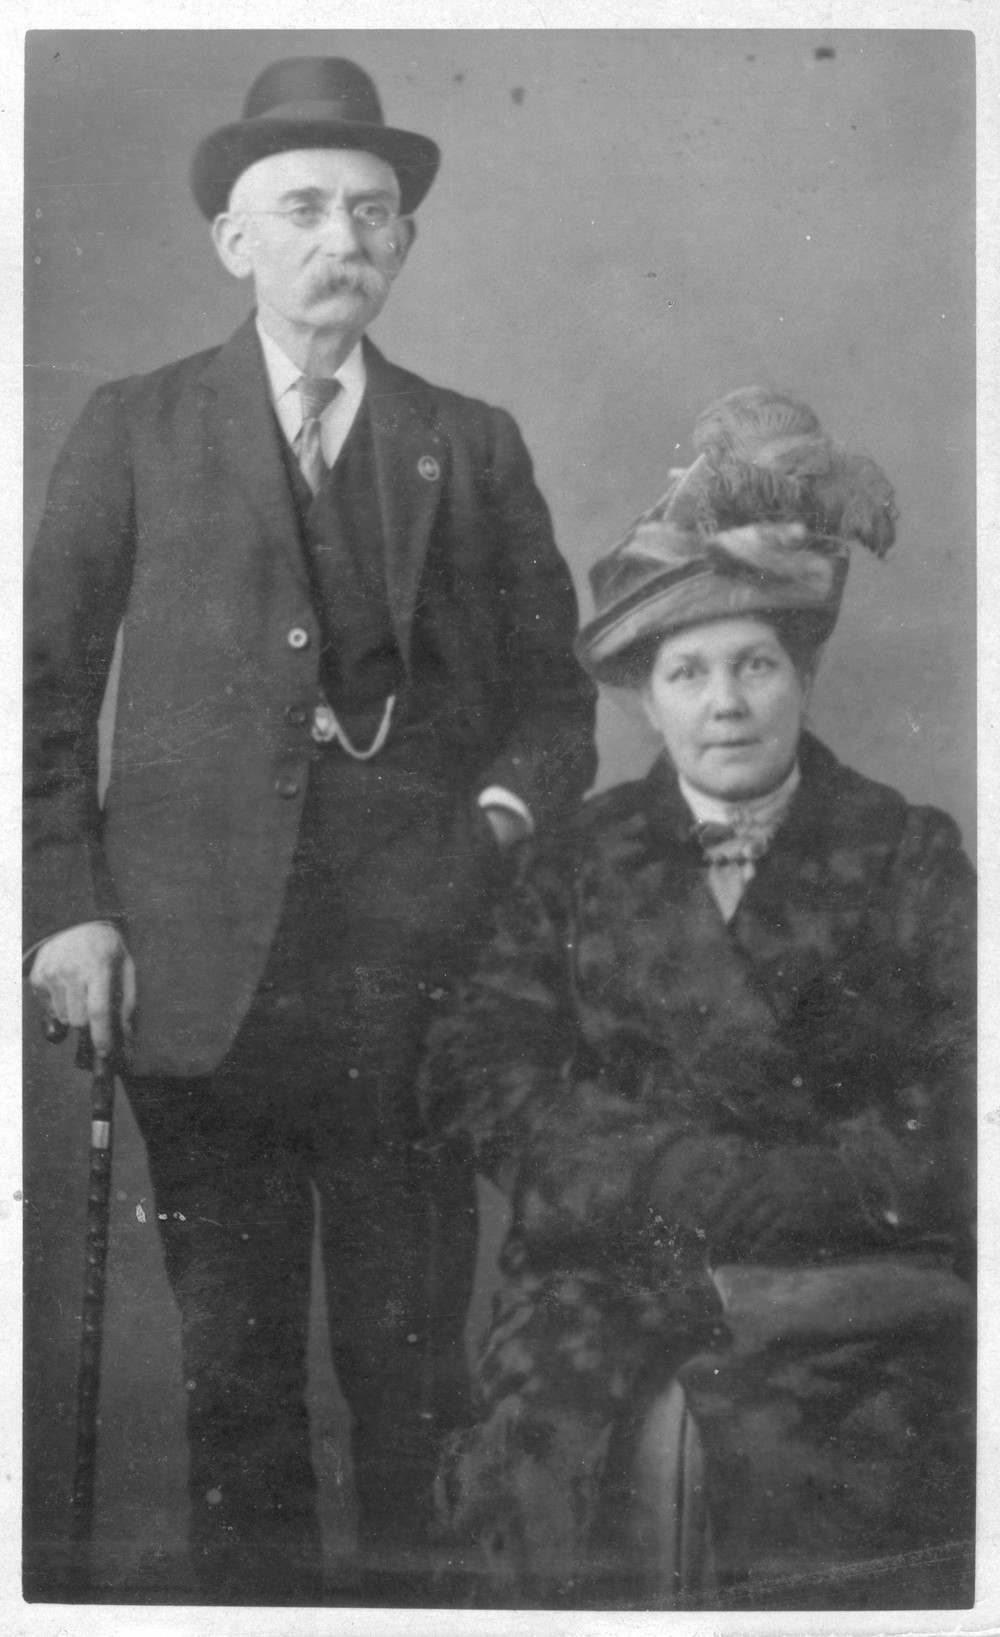 Alice with her husband Alfred, a fellow_supporter of women’s suffrage. Courtesy of Peter Barratt